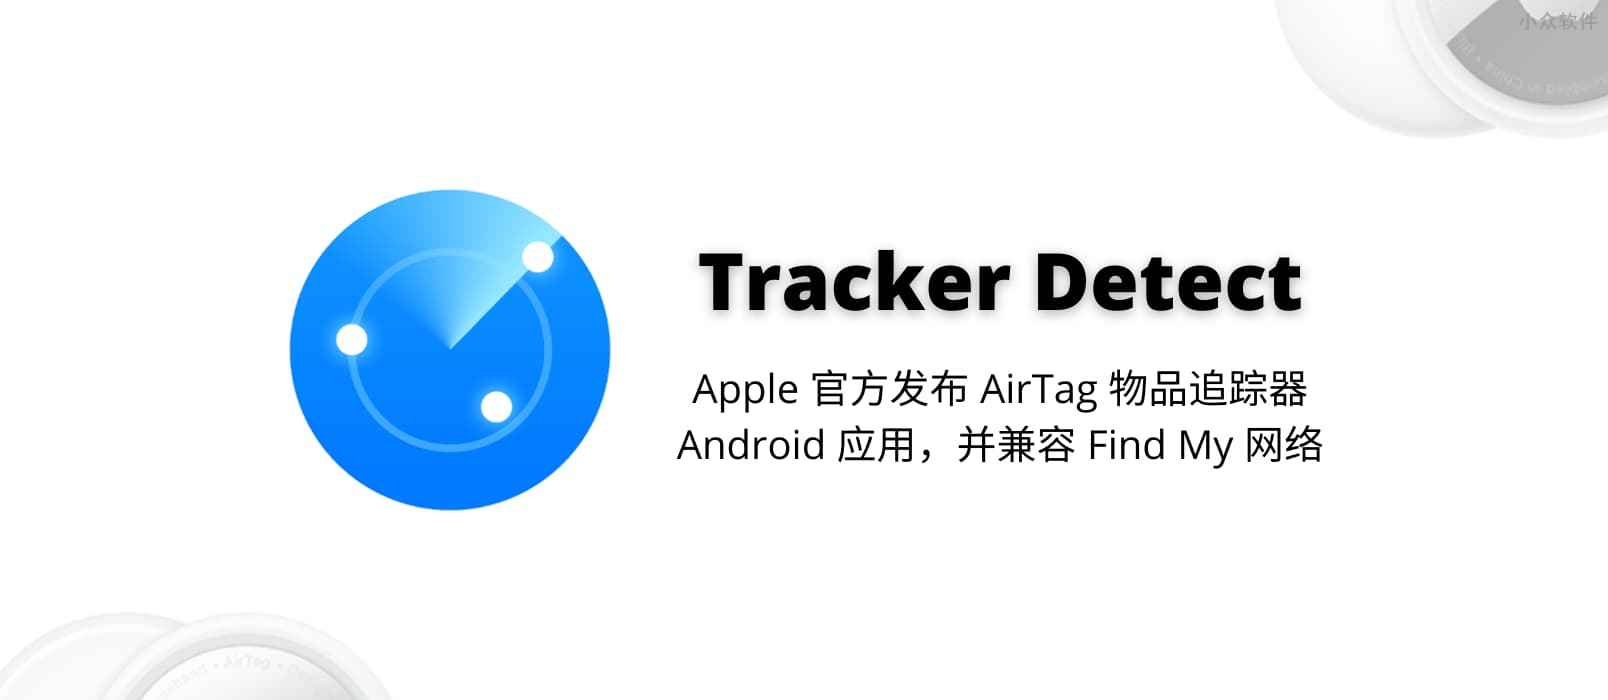 Tracker Detect – Apple 官方发布 AirTag 物品追踪器的 Android 应用